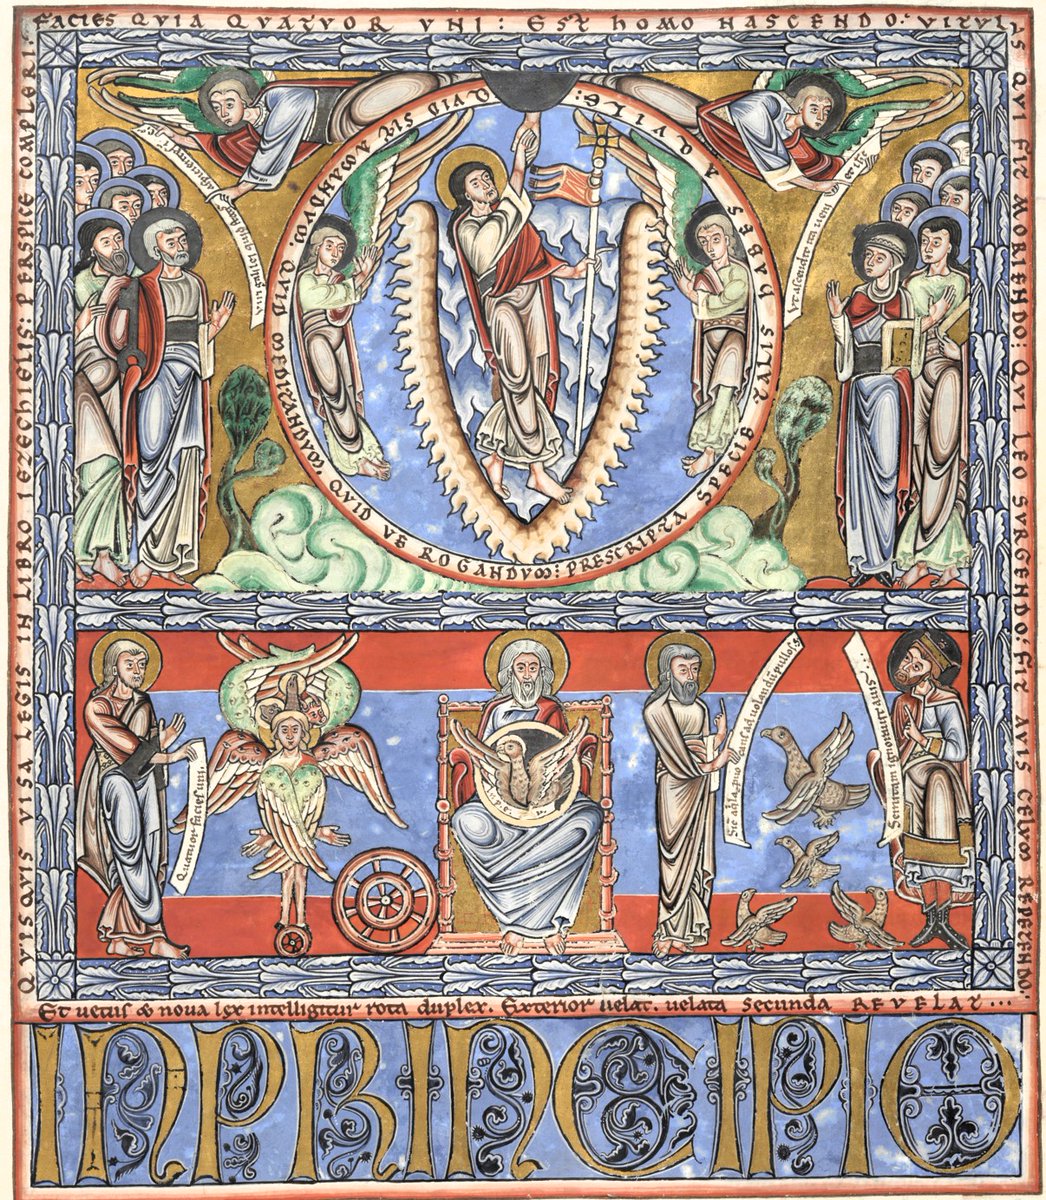 (1/4) In medieval iconography, the eagle is understood as a symbol of Christ ascending into heaven. For this reason, this great image in the Floreffe Bible (c.1160) stands at the beginning of the Gospel according to John, whose attribute is the eagle. @BLMedieval Add.17738, f.199